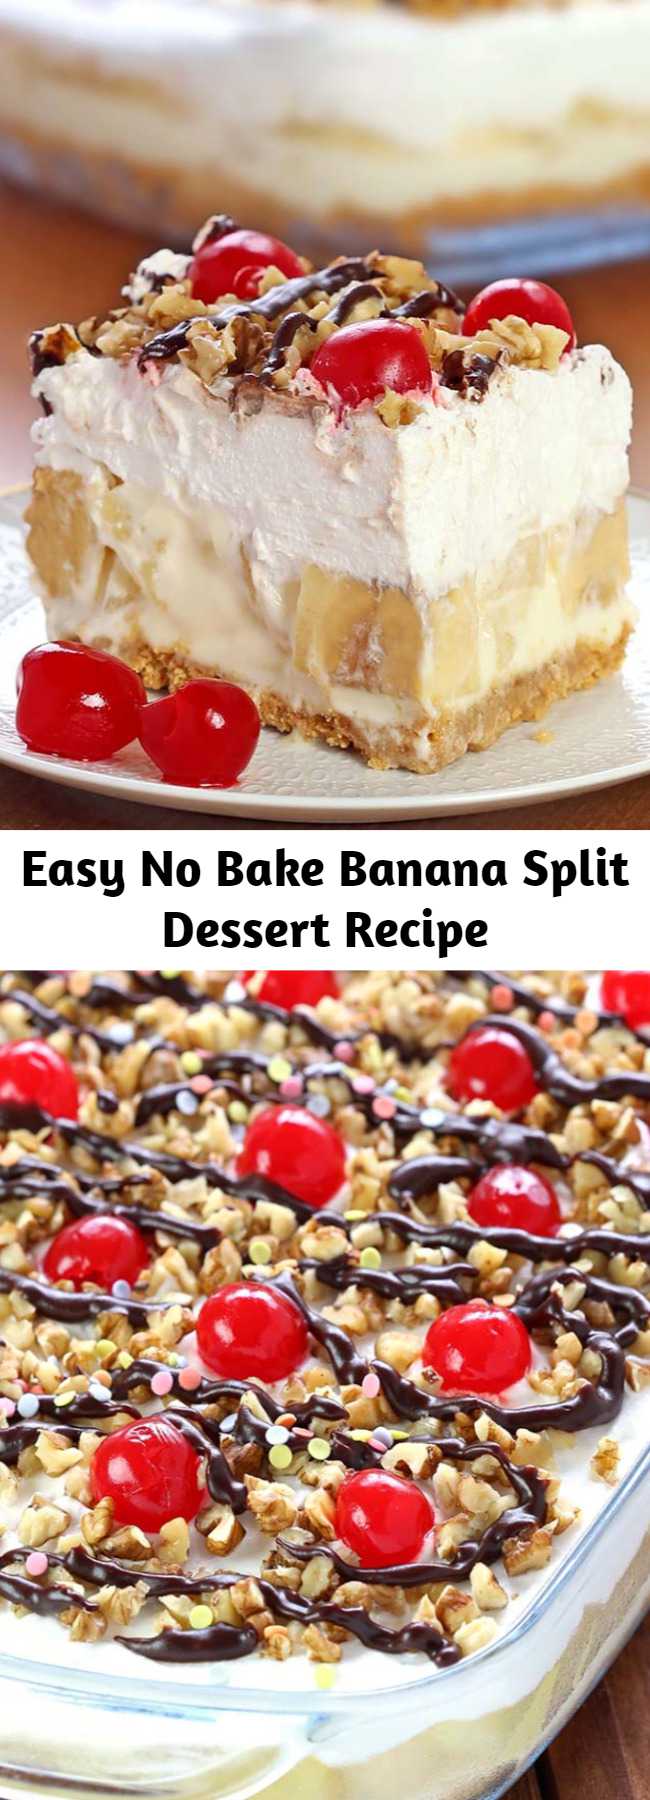 Delicious, rich and creamy, with all the ingredients you love in a banana split, this no-bake Banana Split dessert will be one you make again and again. Perfect summer dessert. #summer #dessert